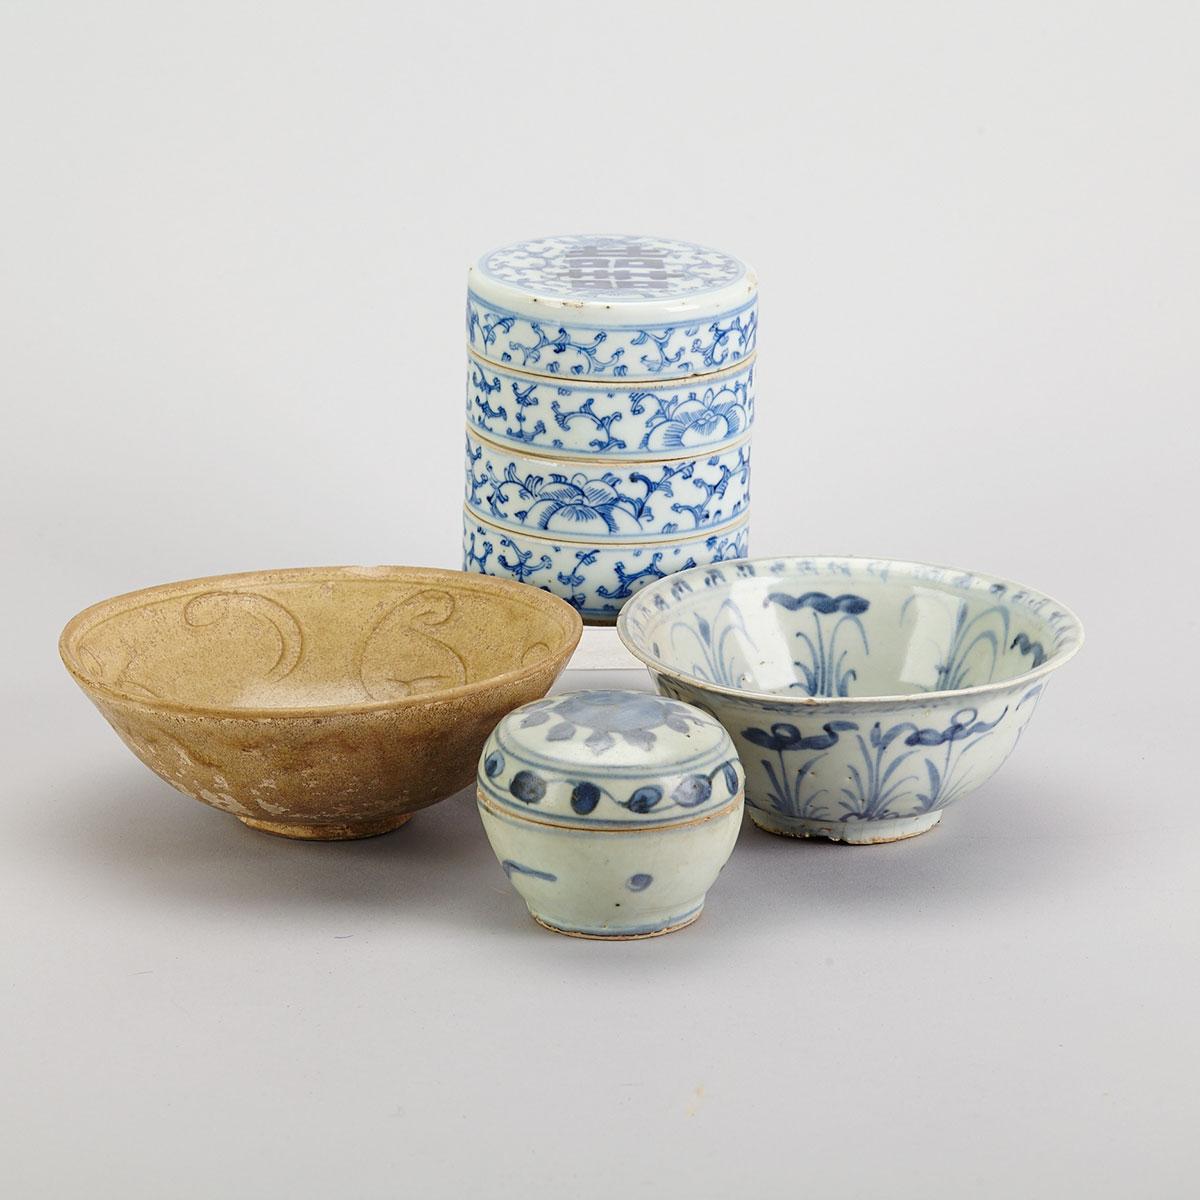 Three Porcelain Wares, 16th to 19th Century